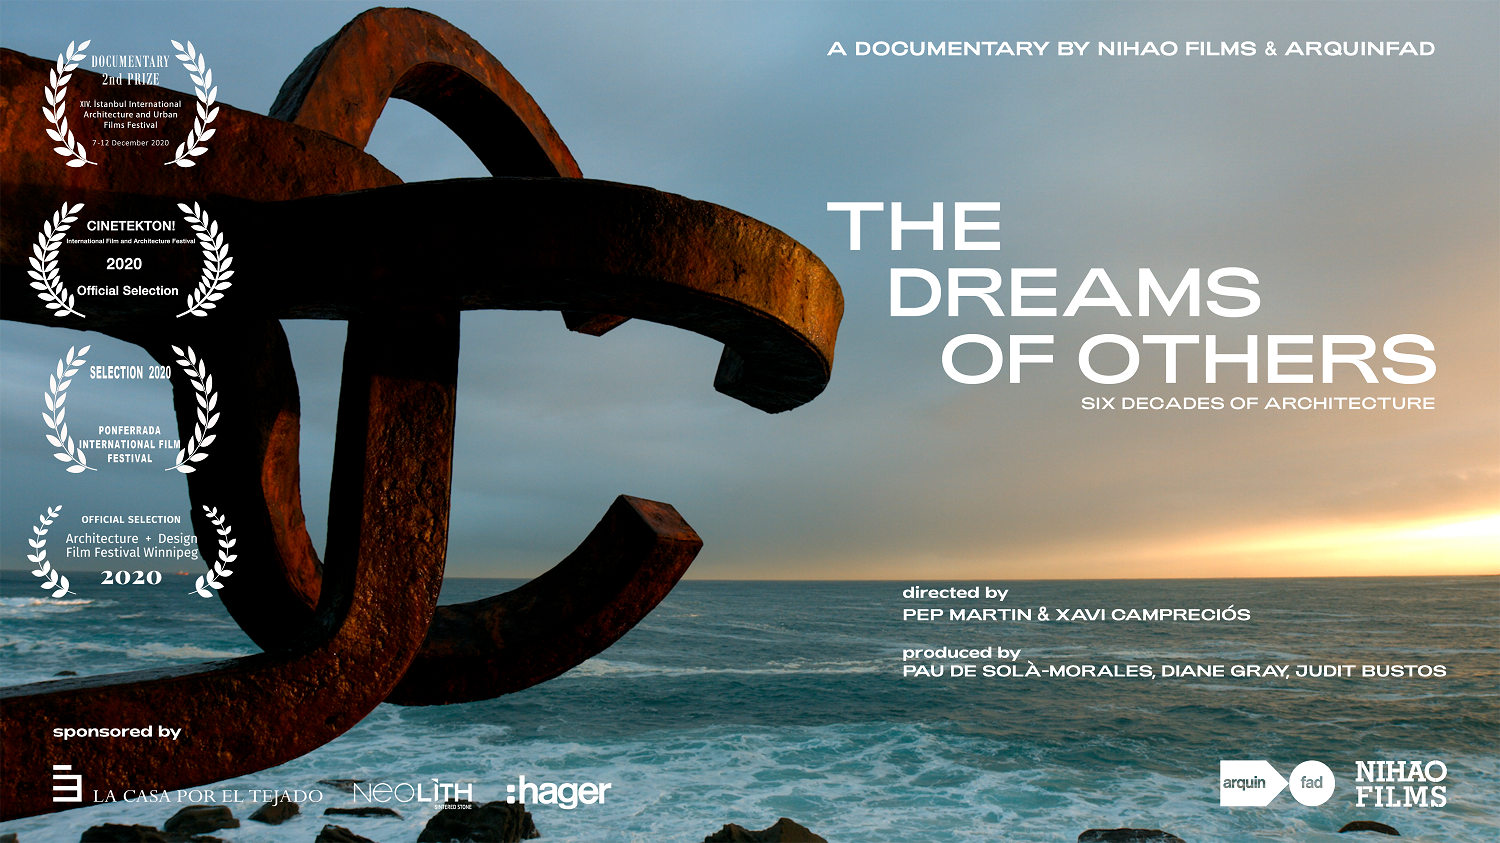 Movie poster for the Dreams of Others film showing a sunset photo looking out over a body of water